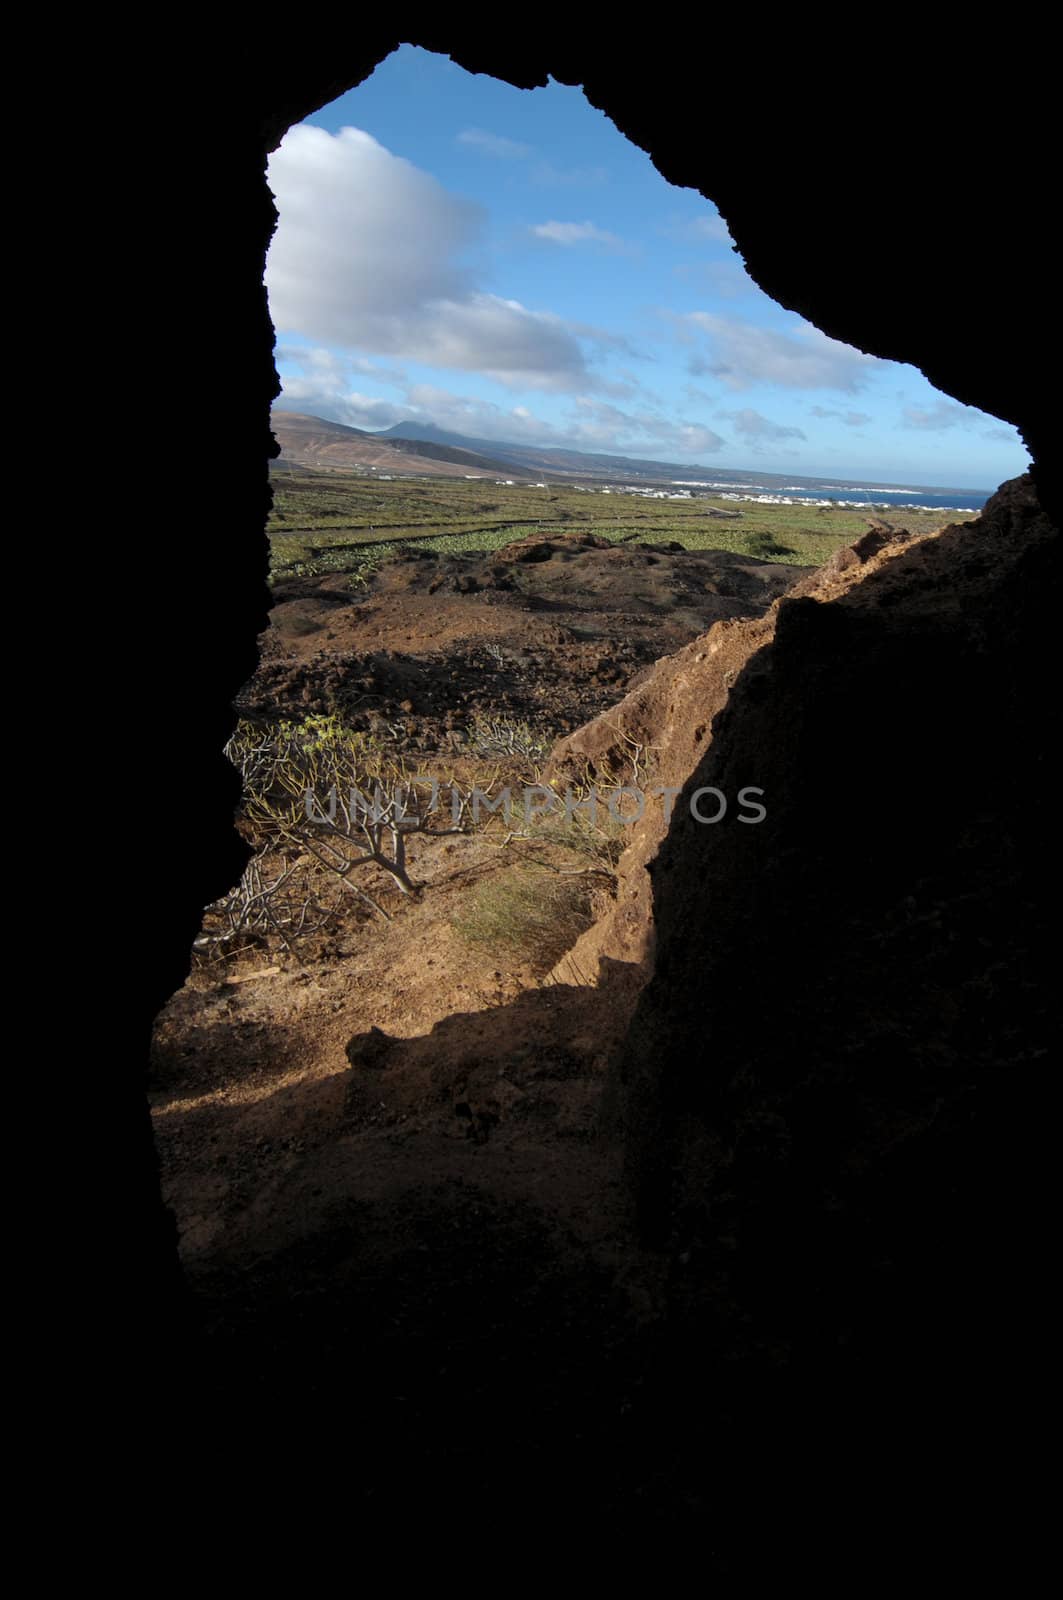 Cave near a volcano in the desert by underworld